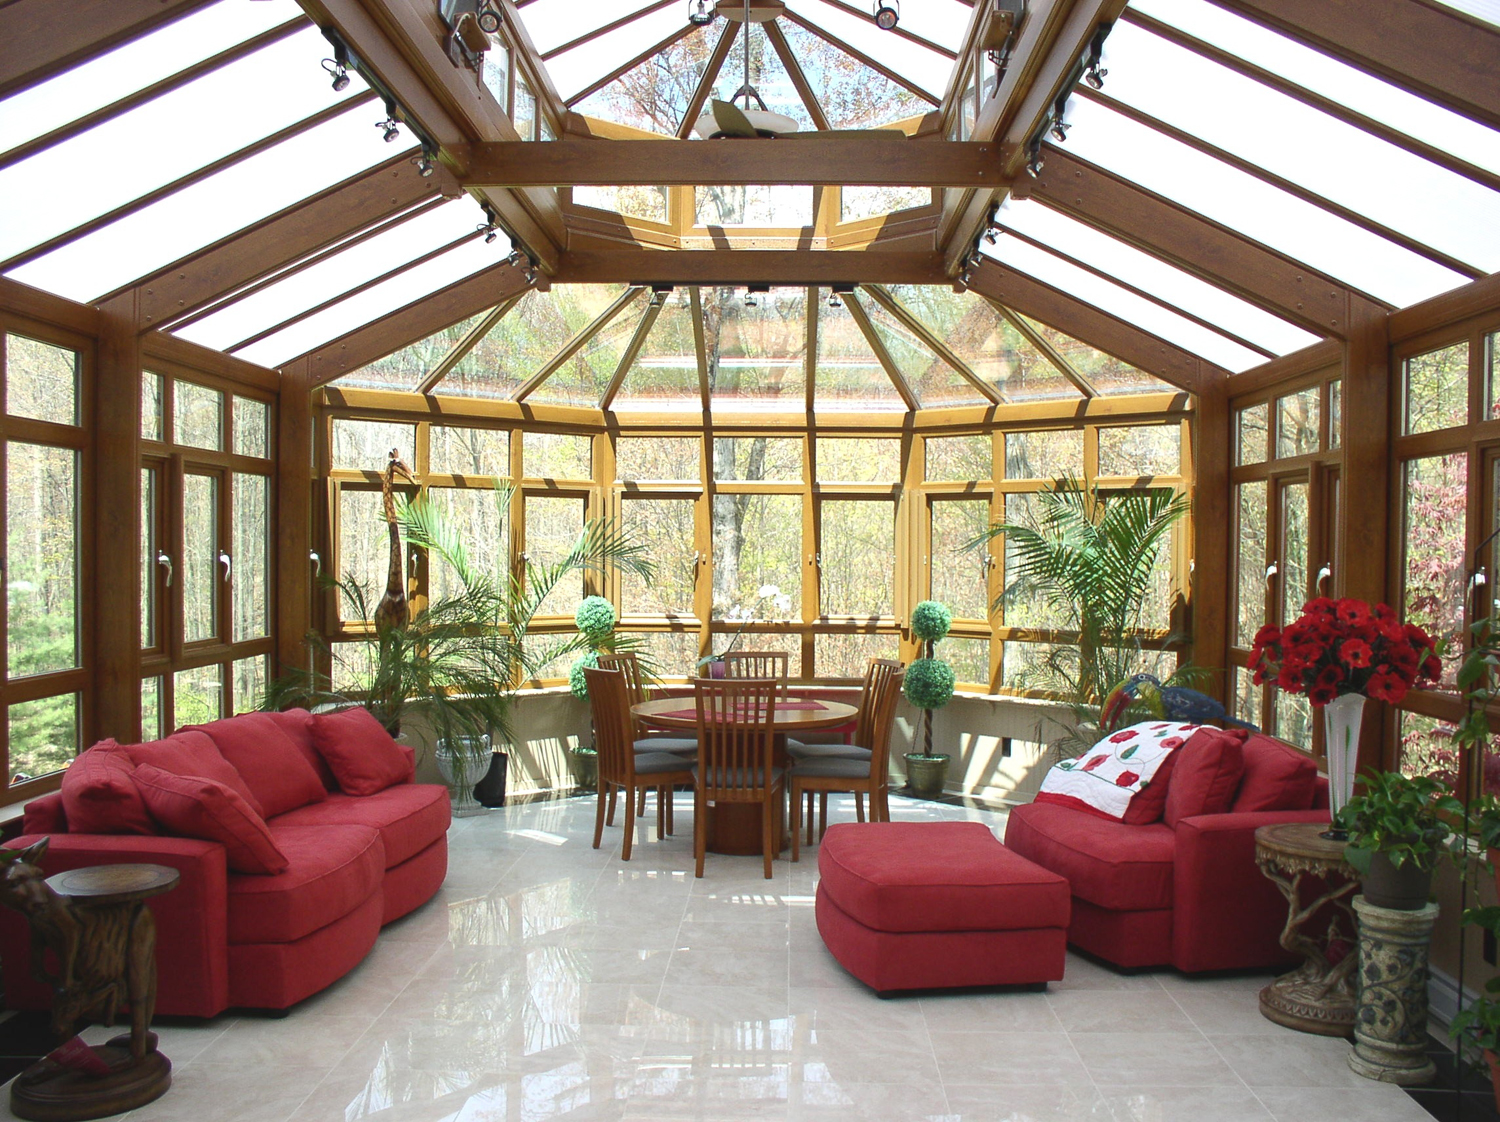 BUILDING PLANS  FOR SUNROOMS  Find house  plans 